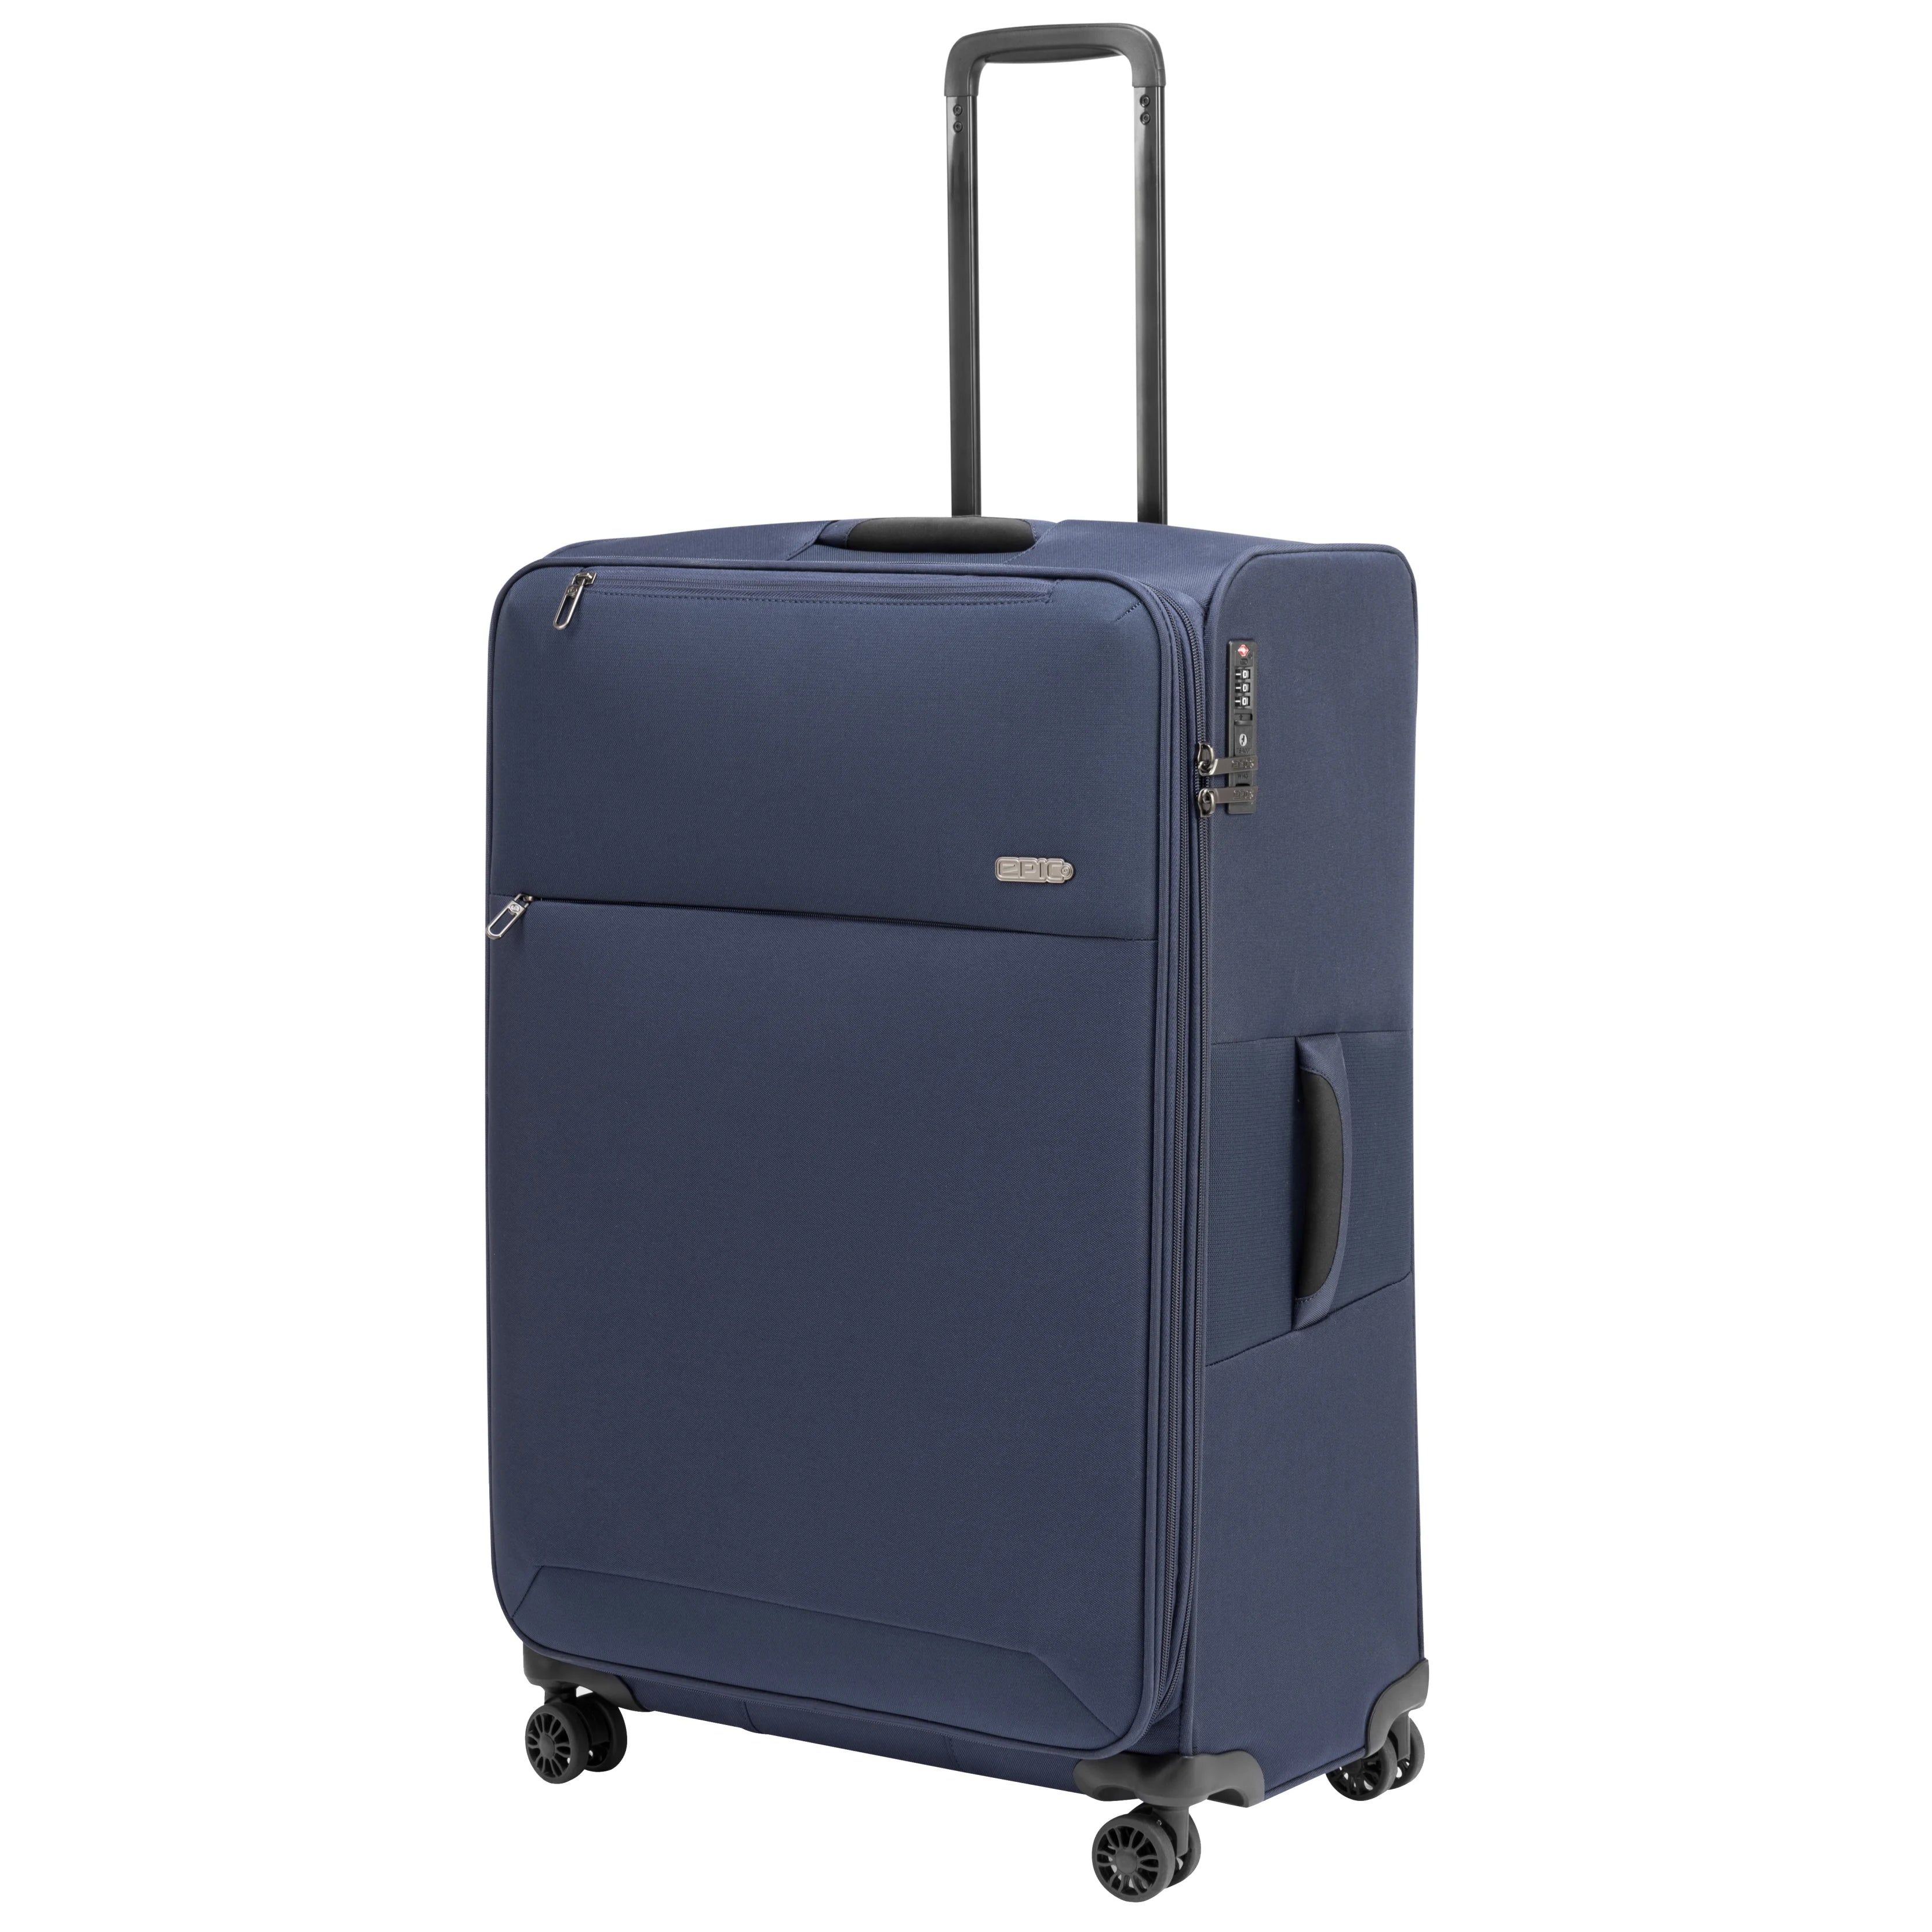 Epic Discovery Neo 4-wheel trolley 77 cm - navy blue